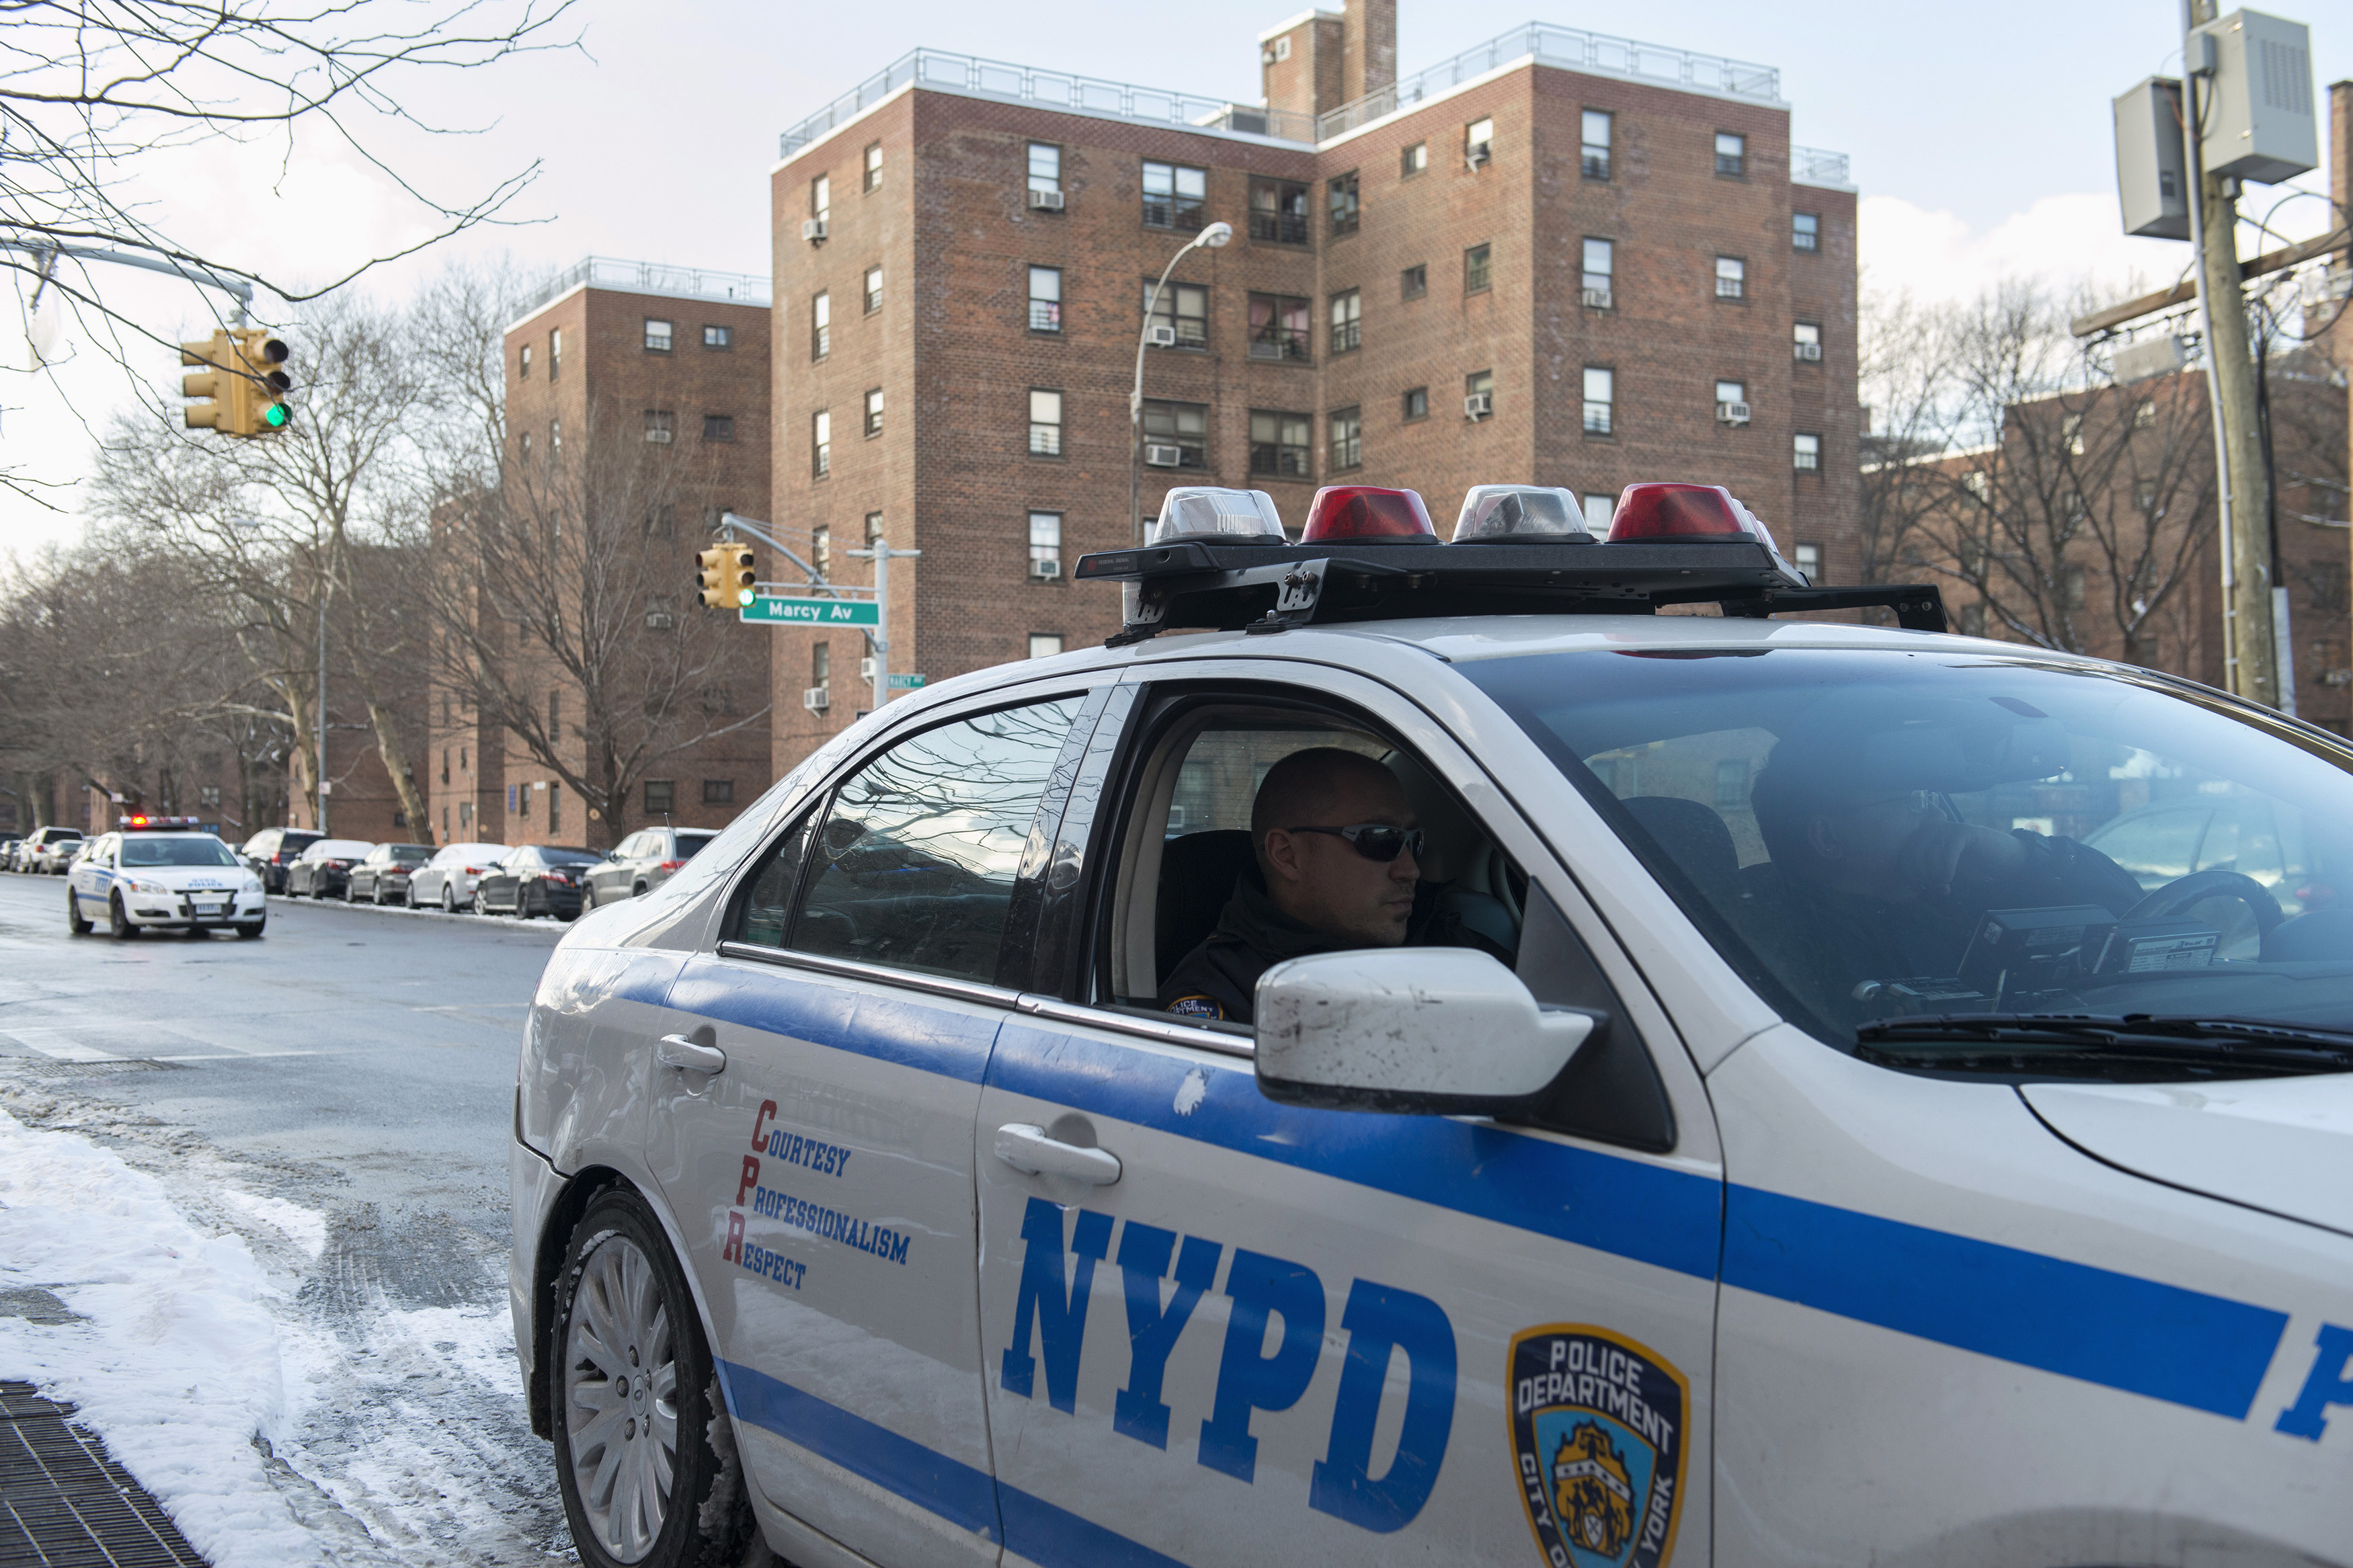 A New York Police Department patrol vehicle is seen near the Marcy Houses public housing development in the Brooklyn borough of New York January 9, 2015. (Stephanie Keith—REUTERS)